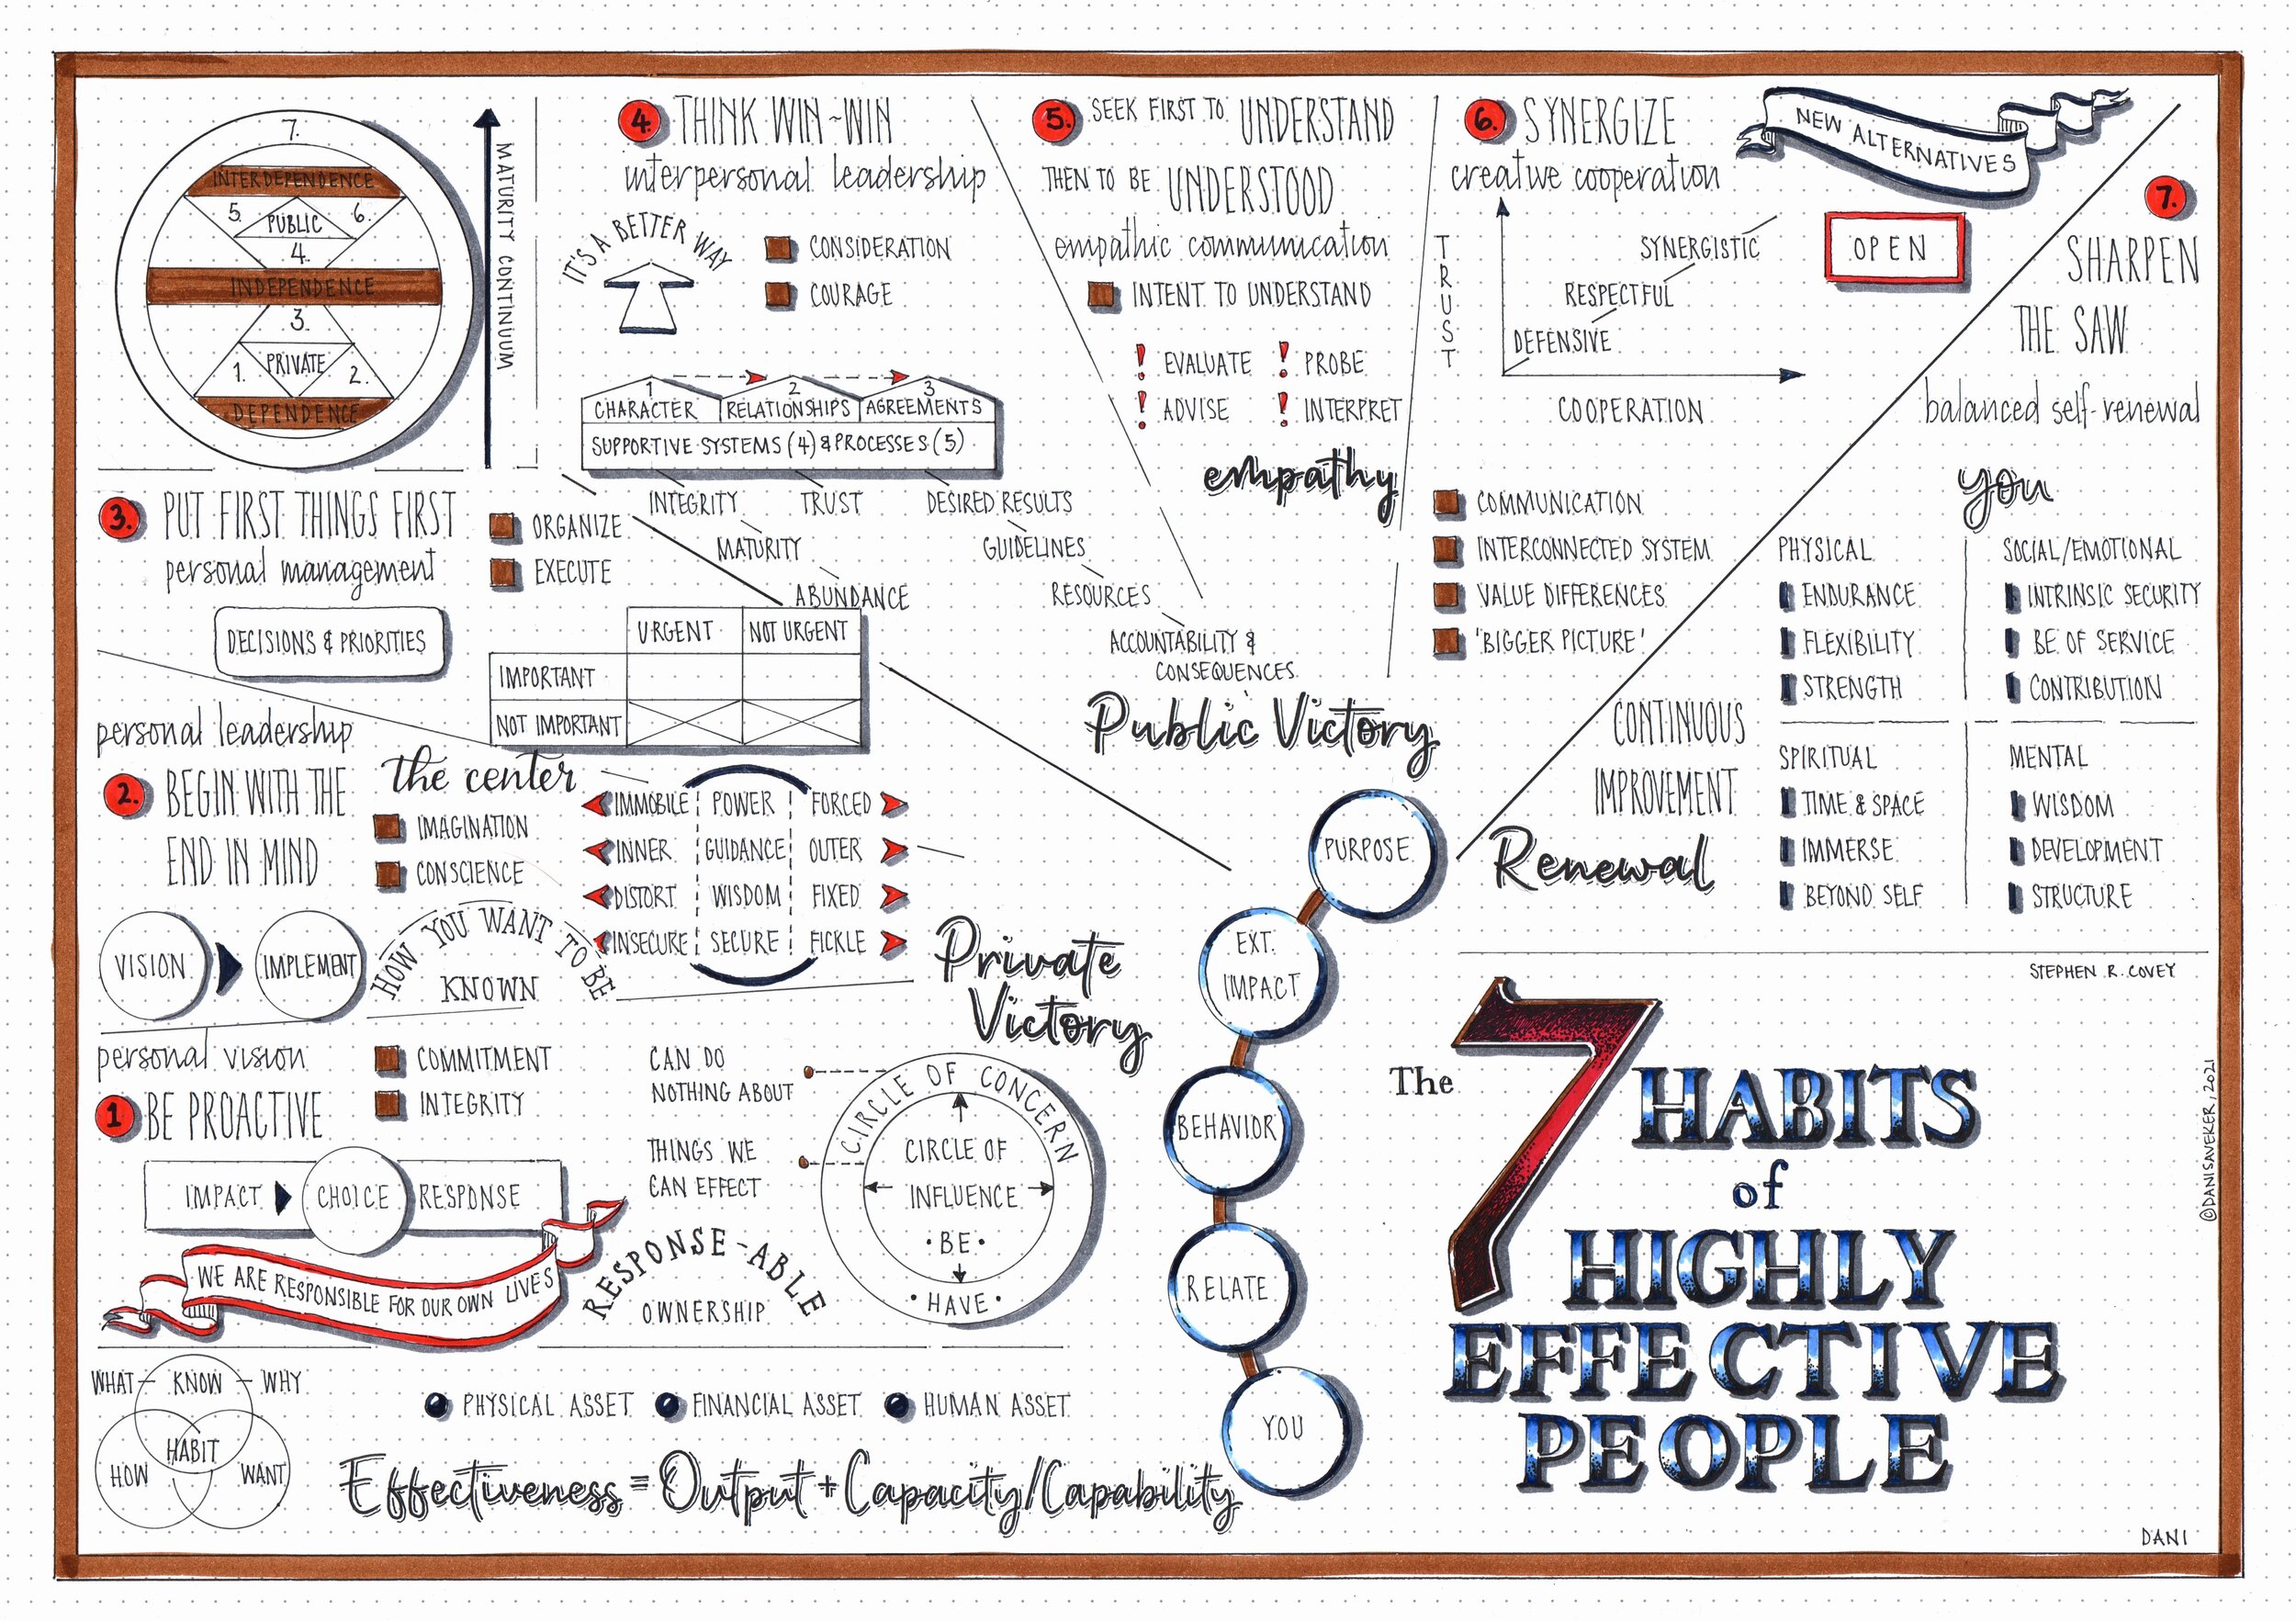 The 7 Habits of Highly Effective People (Stephen R Covey) visual synopsis  by Dani Saveker — Visual Synopsis